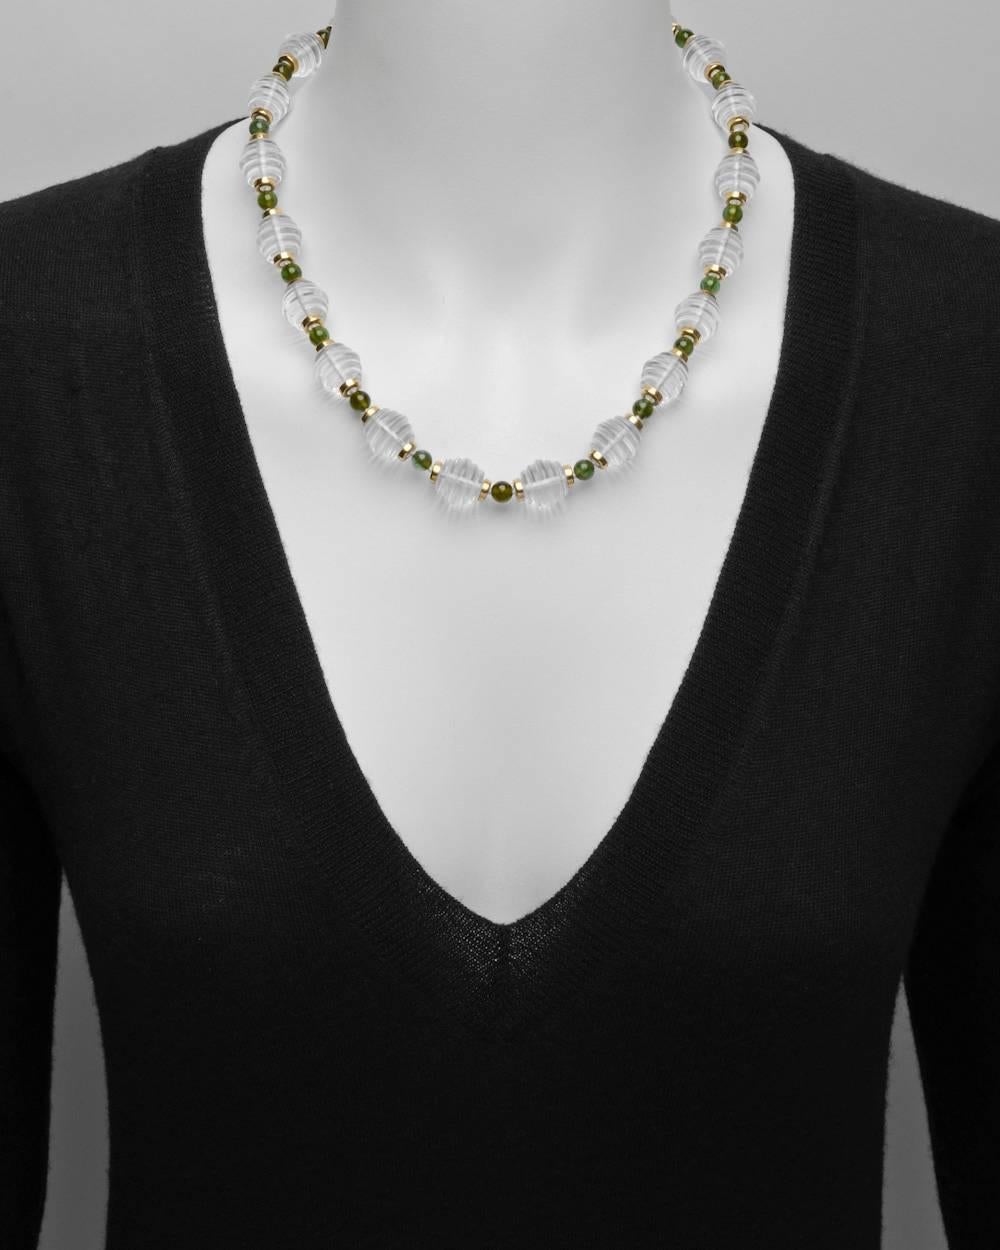 Bead necklace, composed of larger beehive-shaped rock crystal beads with 14k yellow gold alternating with smaller round-shaped green tourmaline beads, signed Trianon. Screw-style clasp at back. 20.5